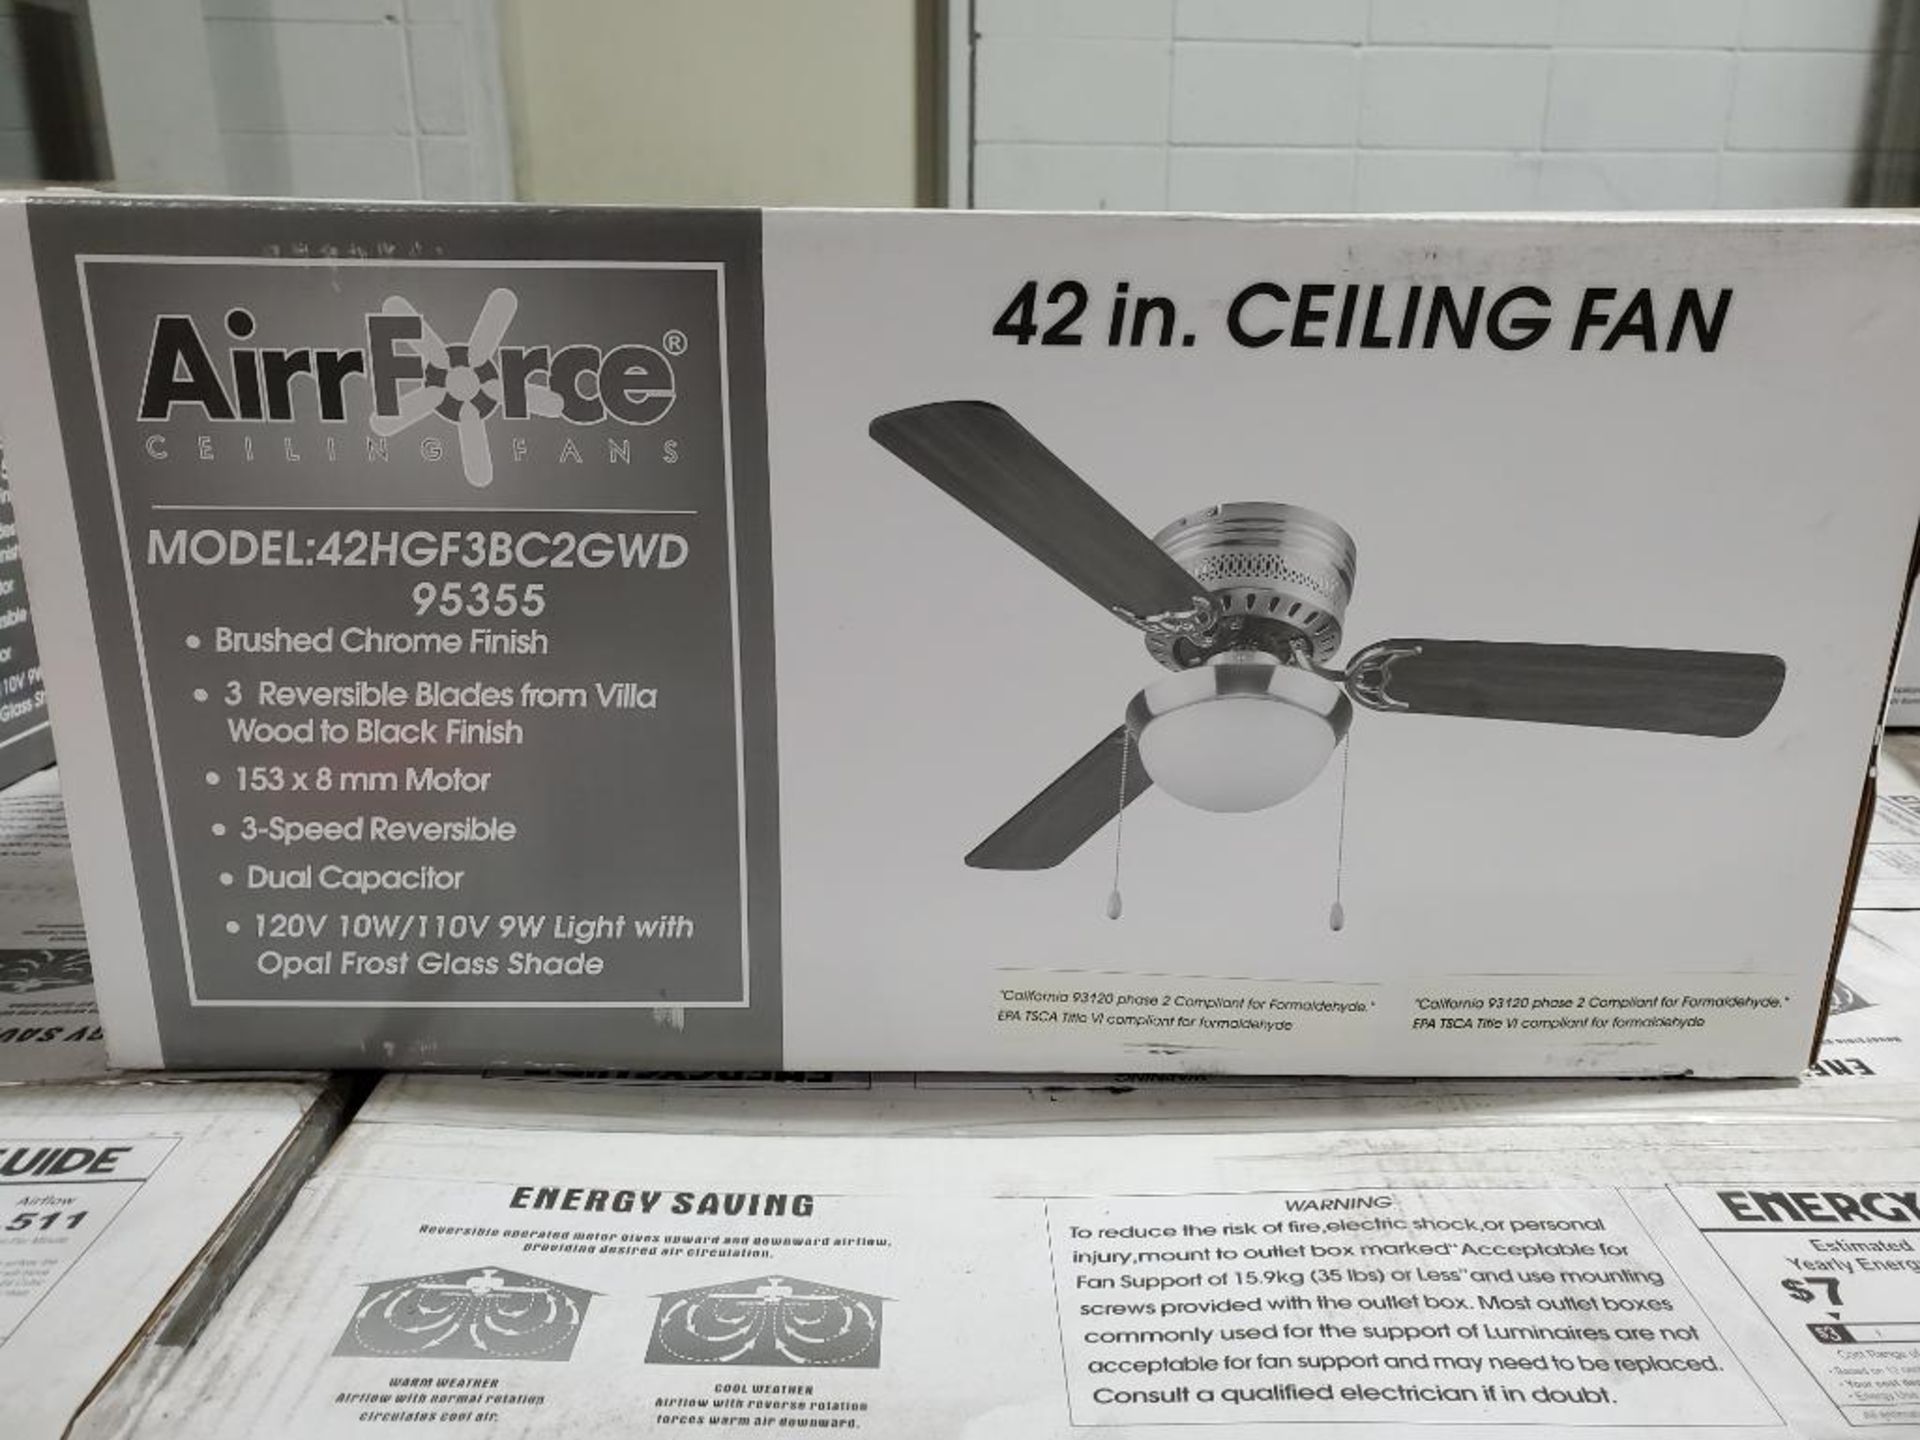 Qty 6 - AirrForce Ceiling Fans 42HGF3BC2GWD, 95355. 42 in ceiling fan. New in box. - Image 2 of 4